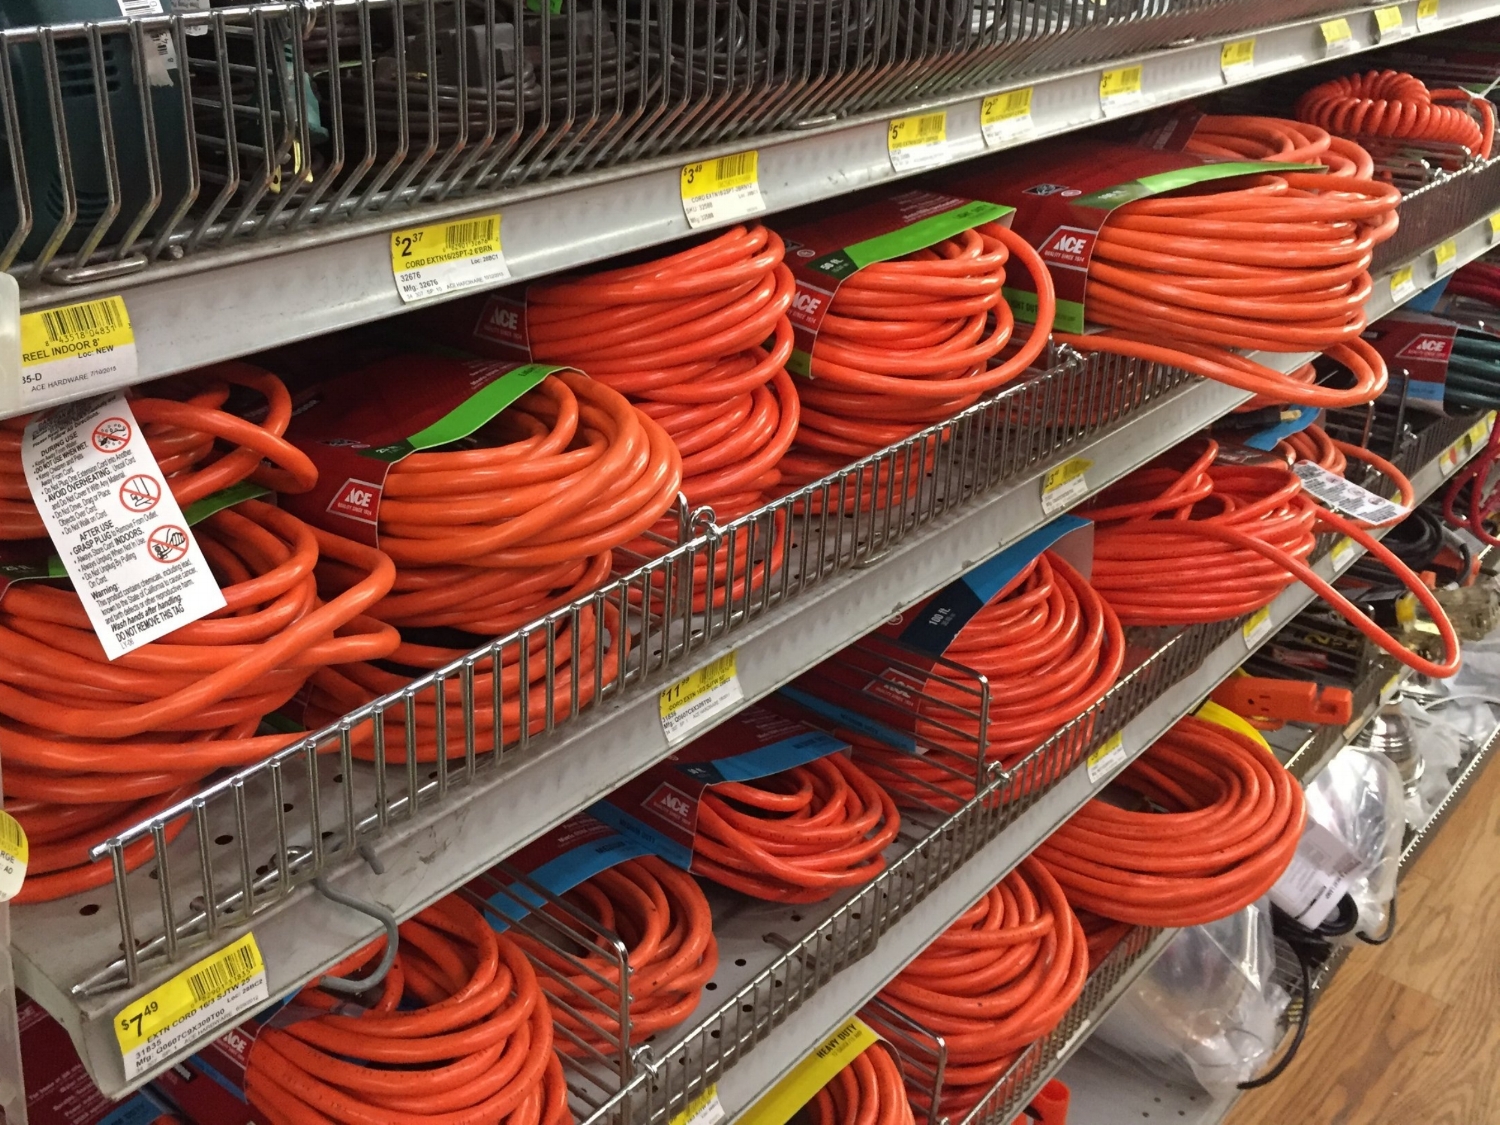   Electrical Supplies  